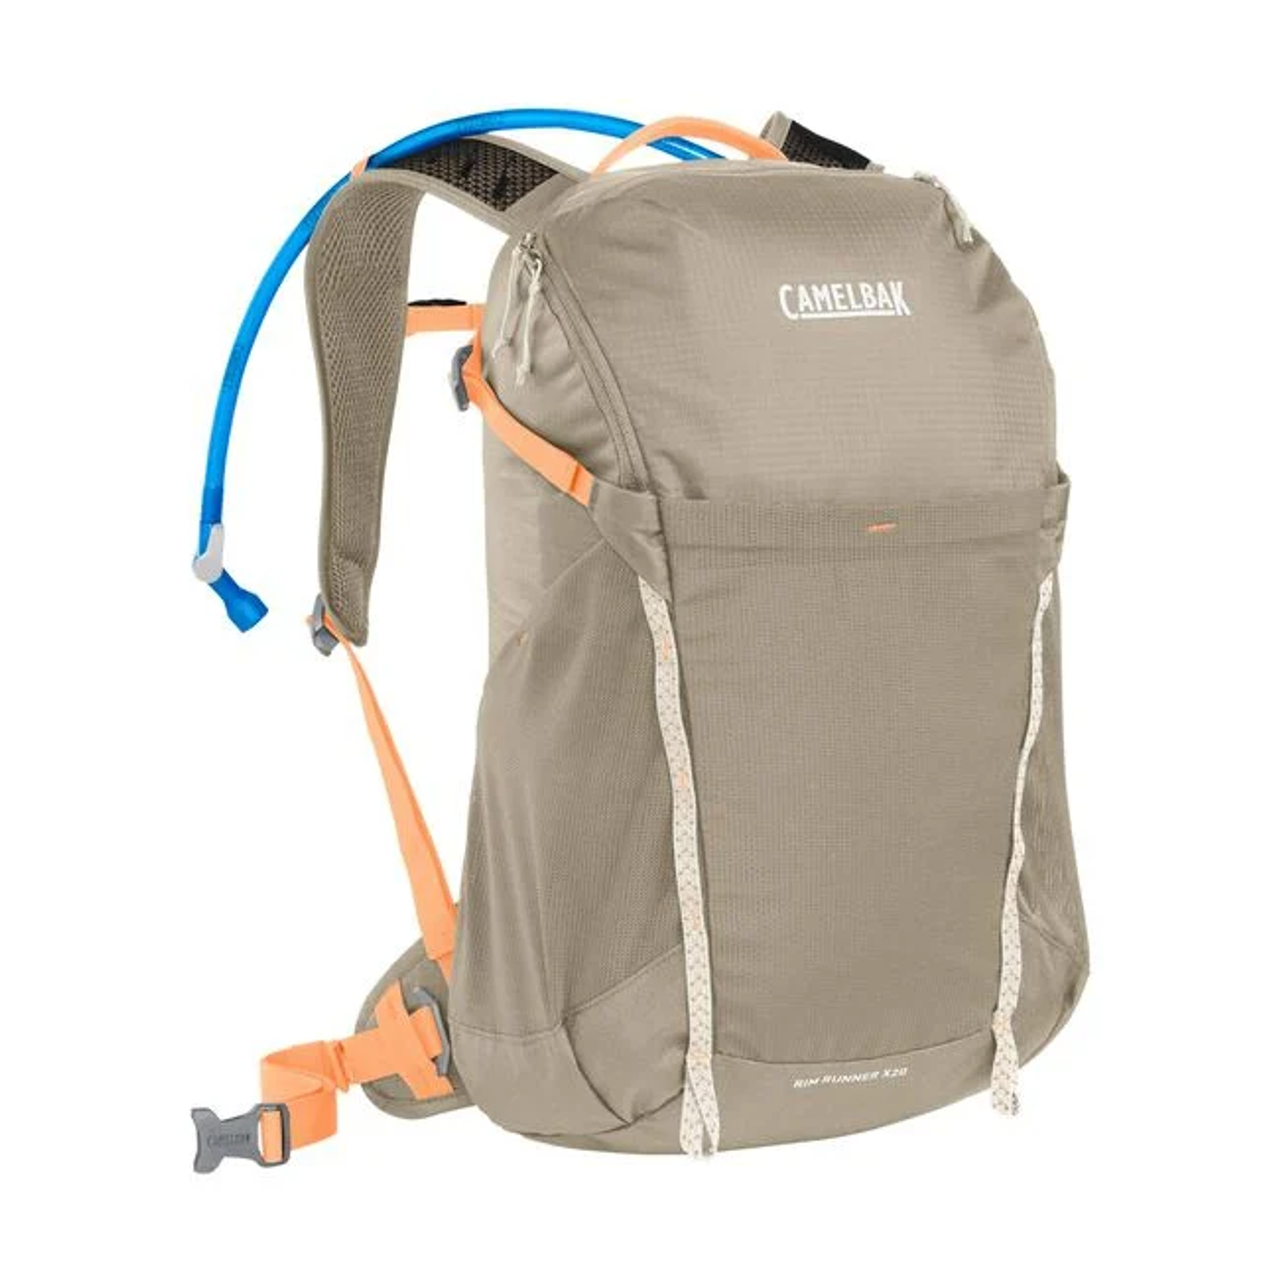 How to customise your backpack for a second rod + Camelbak 